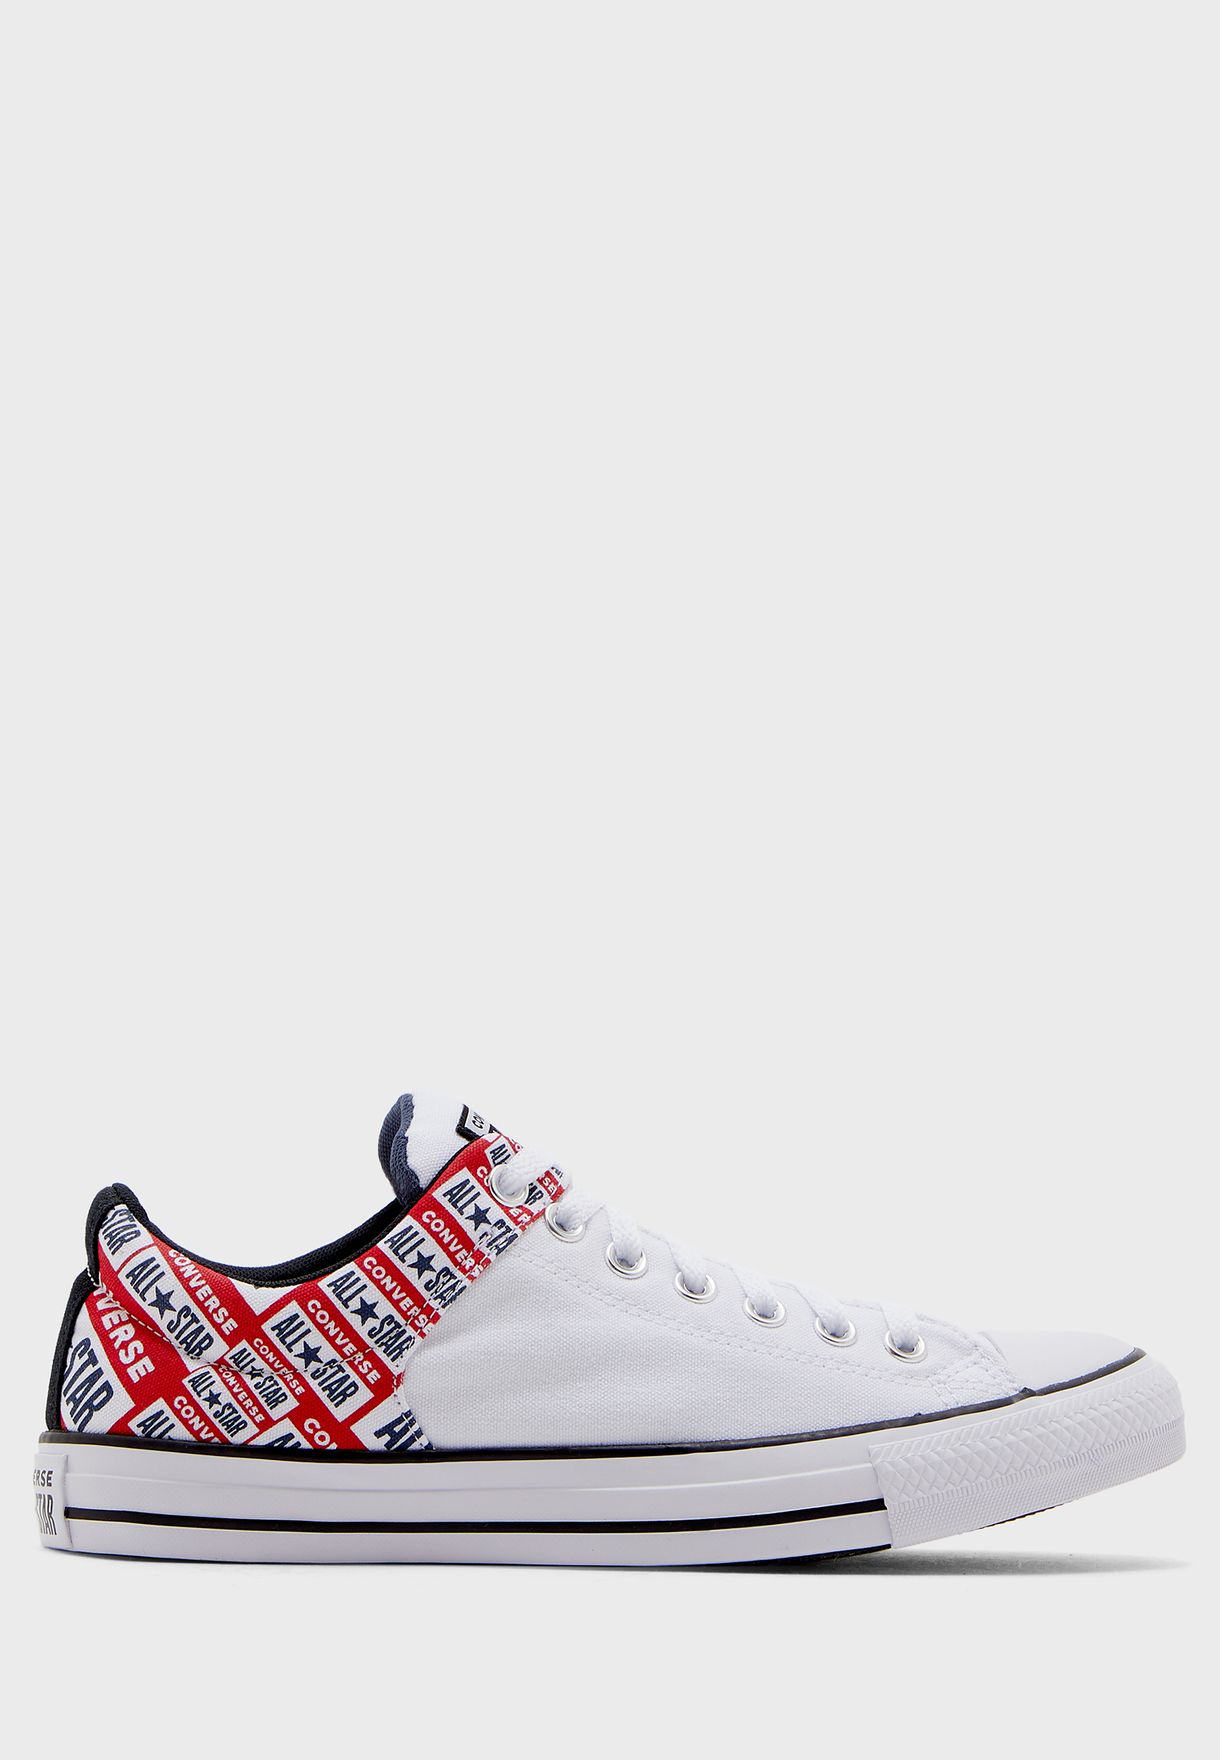 cheapest place to buy converse uk